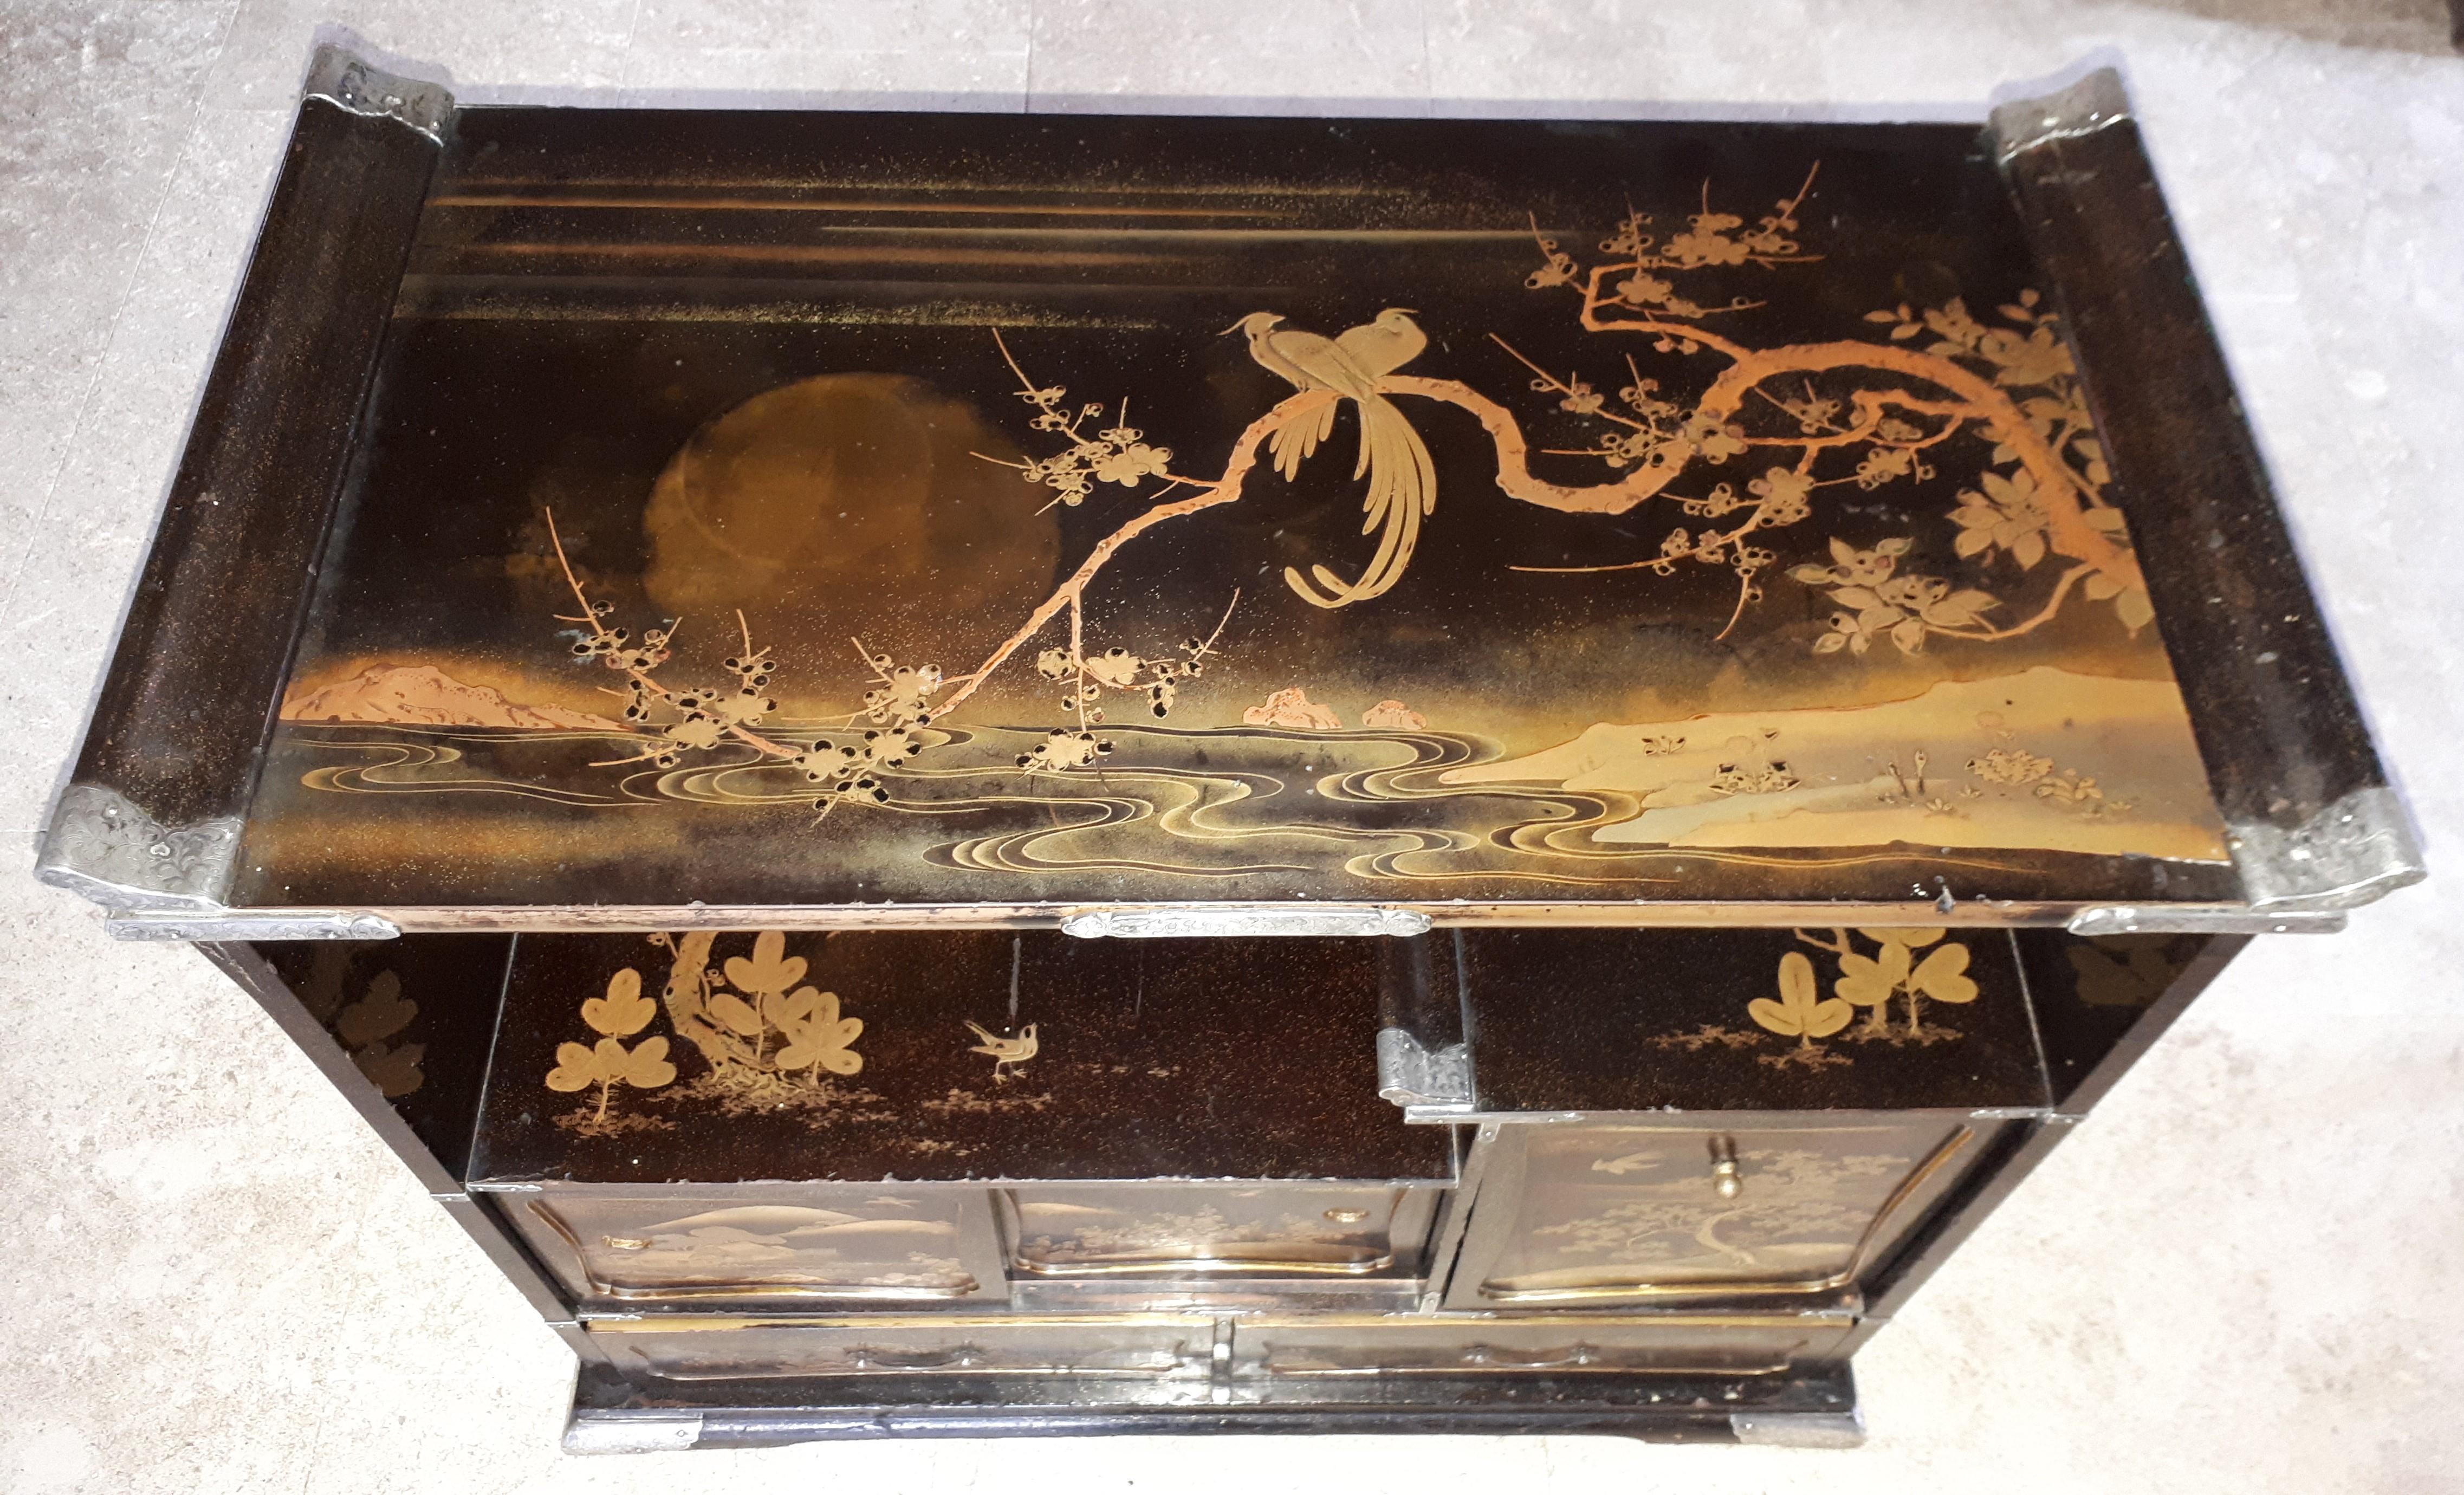 Precious and rare small kazaridana lacquered on all sides with two drawers and three panels decorated with fish, landscapes and birds. The removable panel reveals a locker with a small drawer. The different decorations in hira and taka-maki-e have